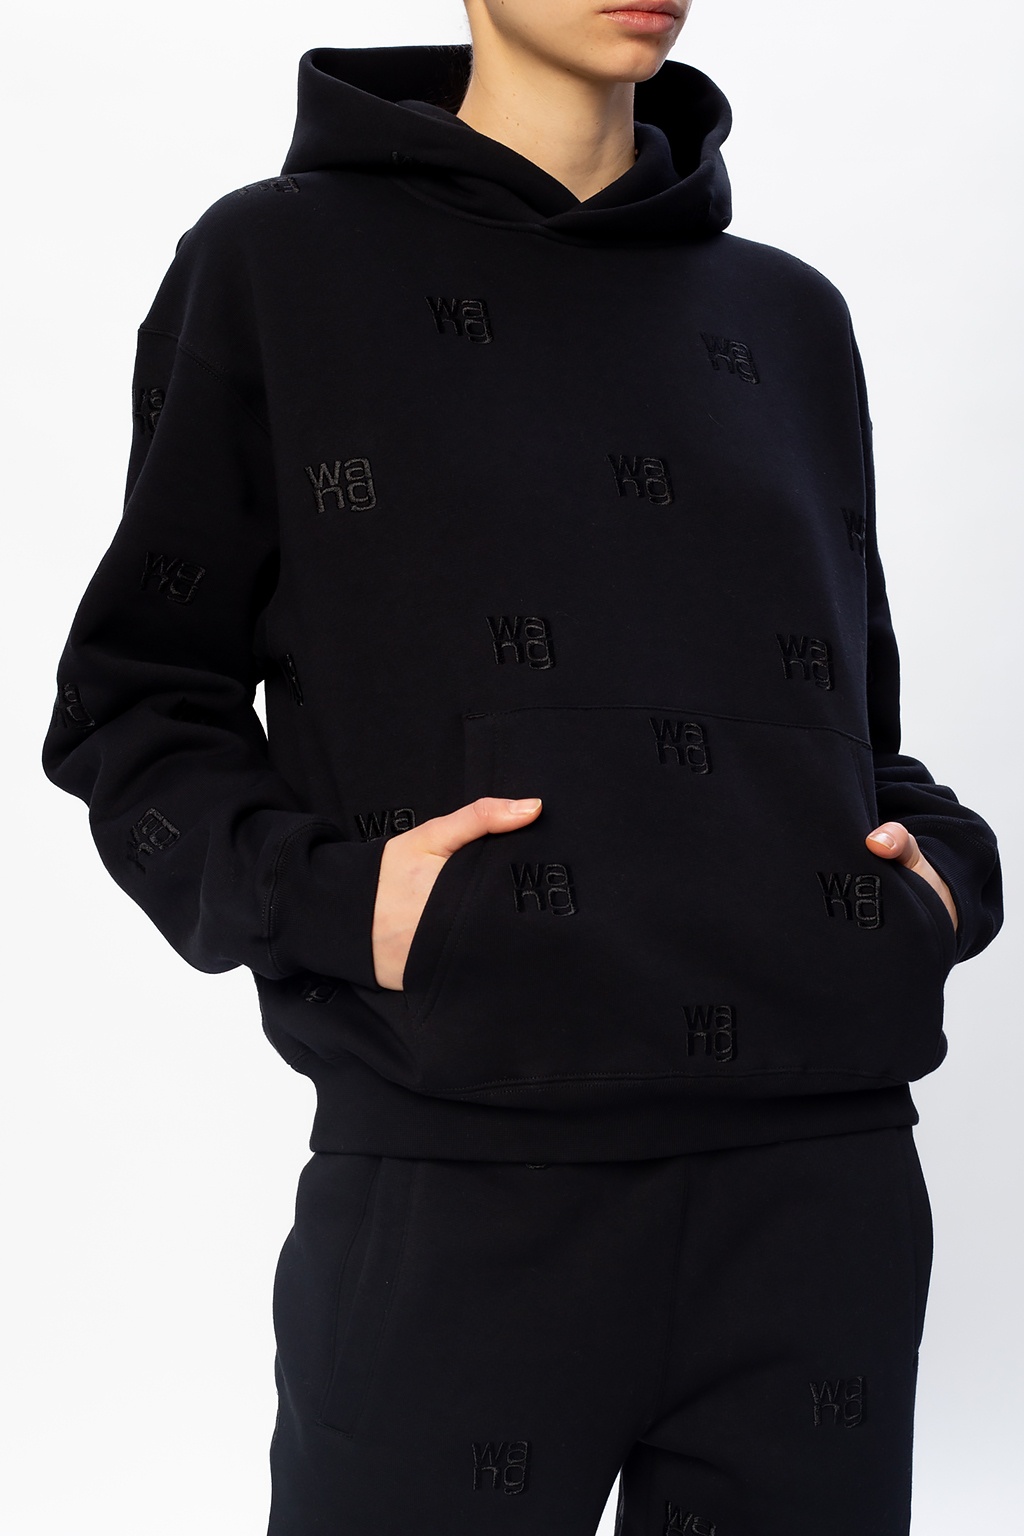 alexander wang Sweatshirt with embroidery available on